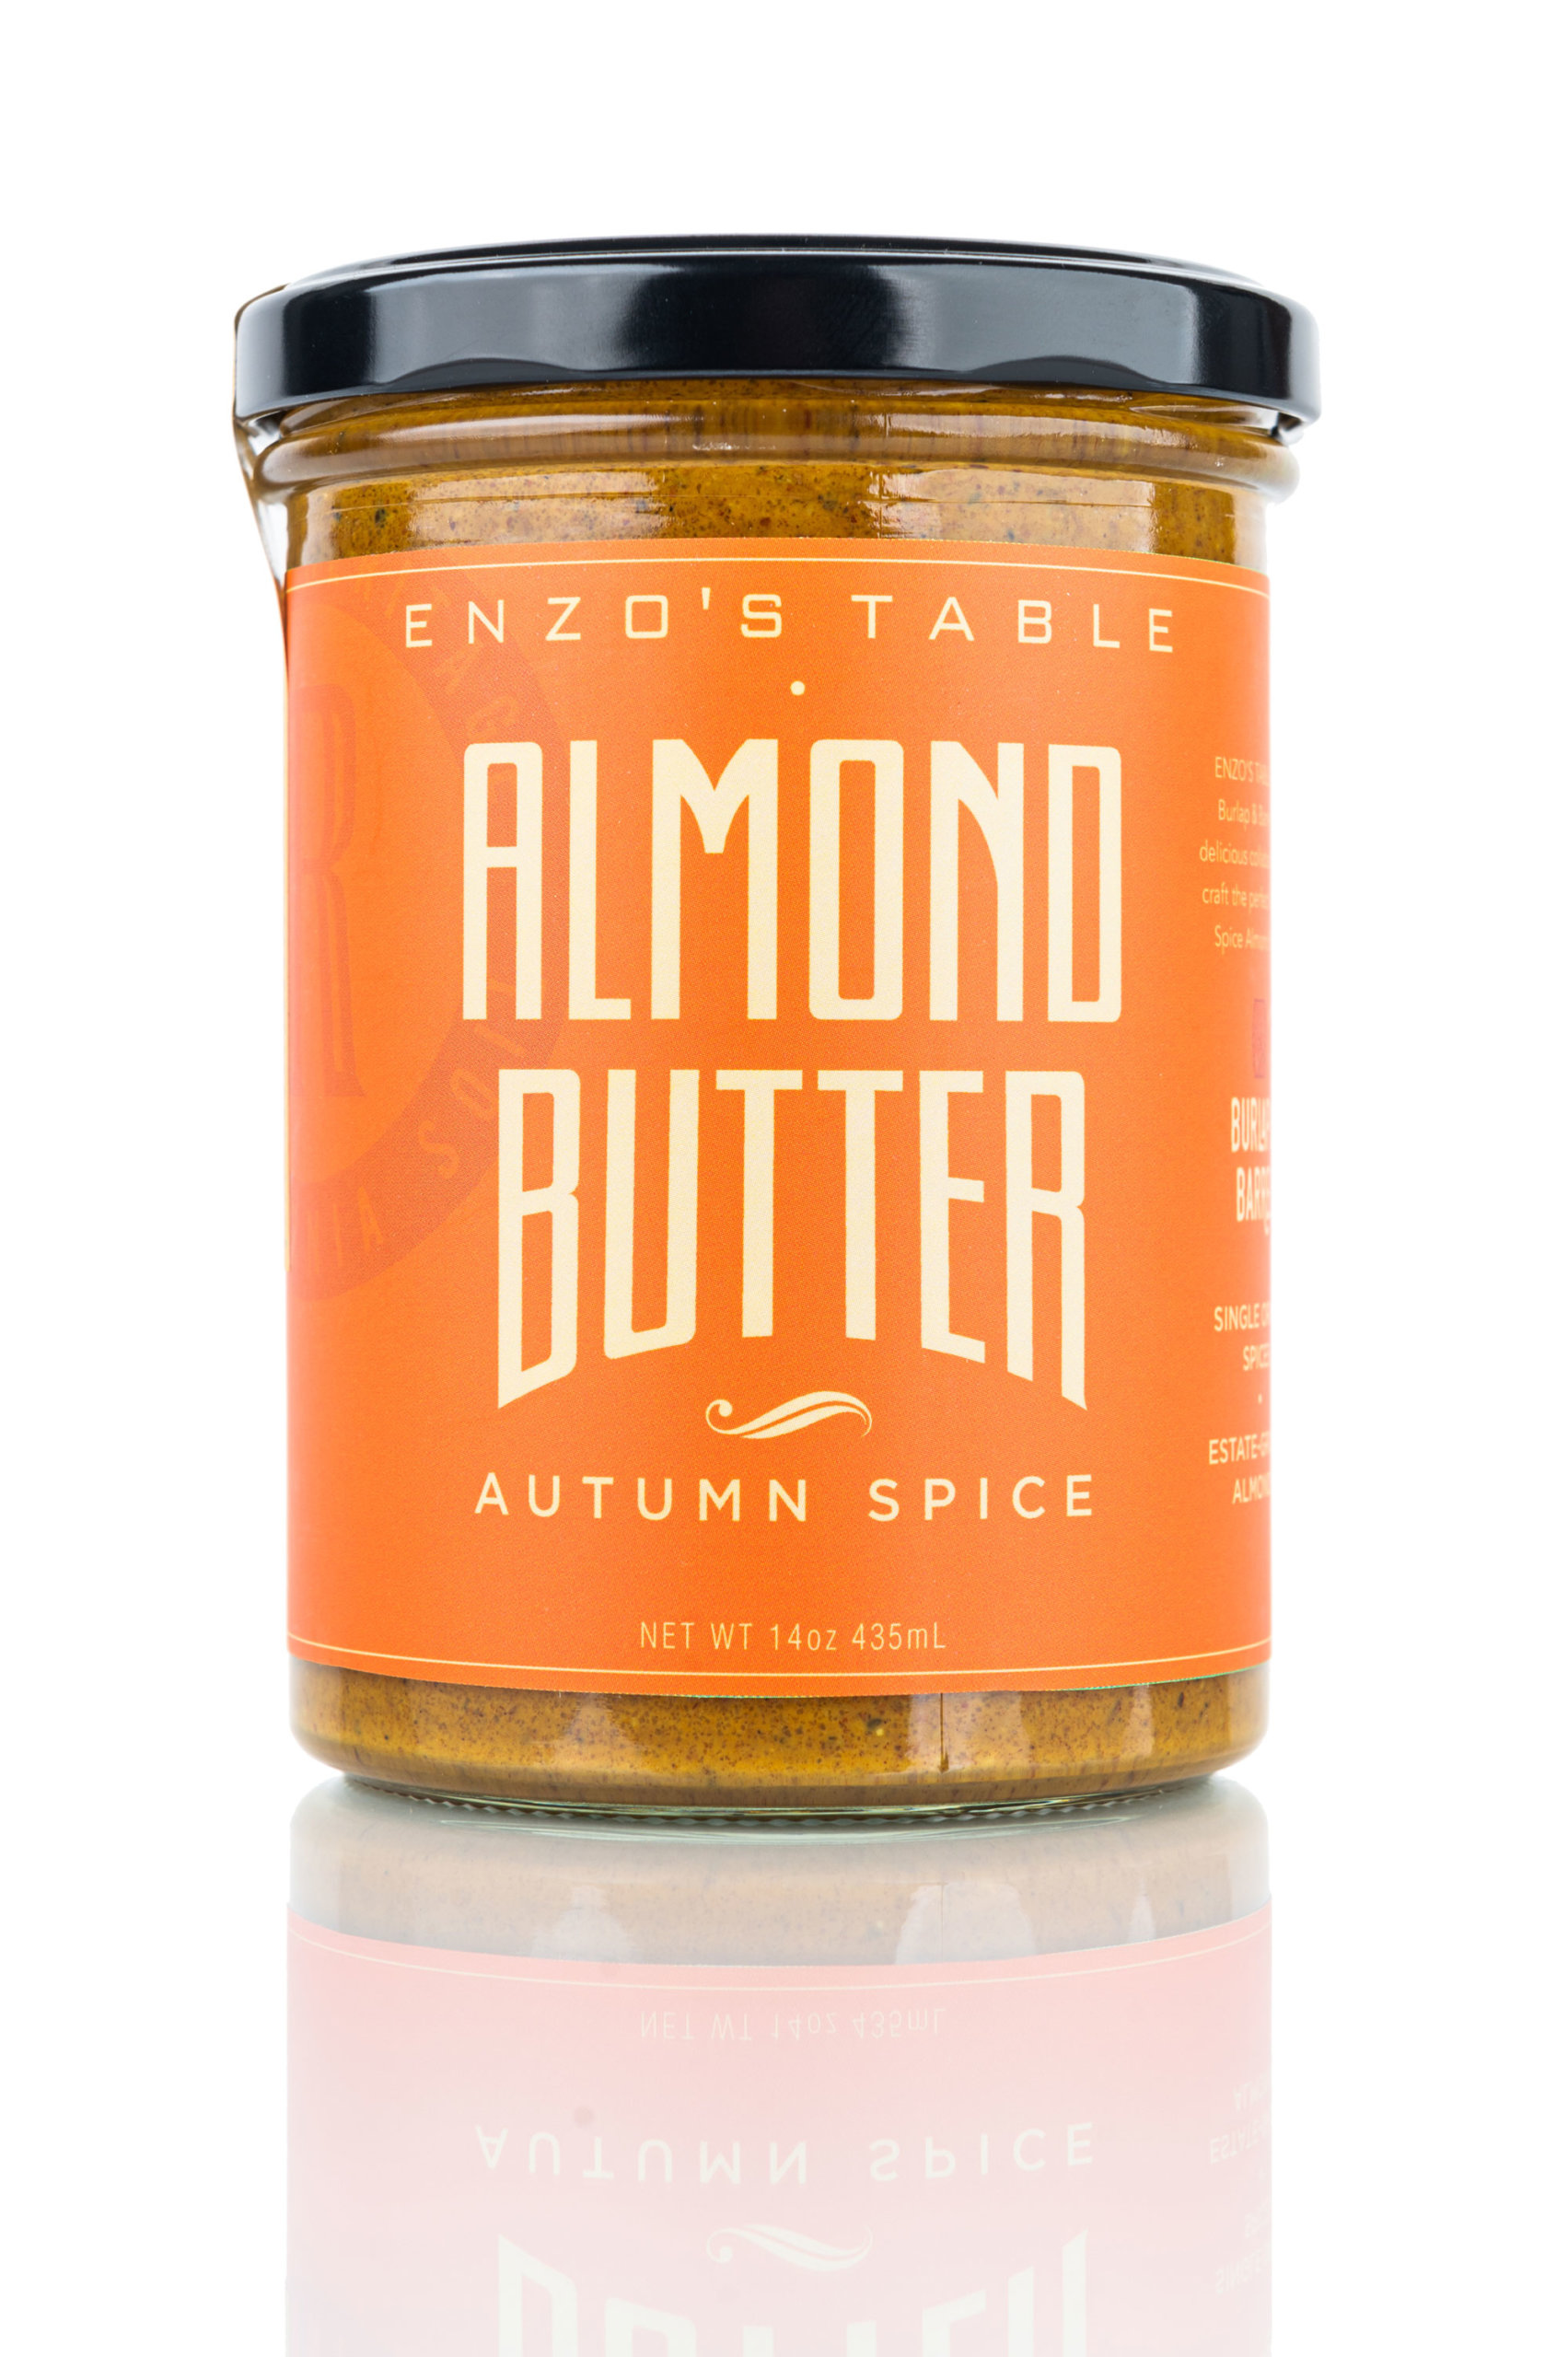 ENZO'S TABLE's new Autumn Spice Almond Butter in collaboration with Burlap & Barrel